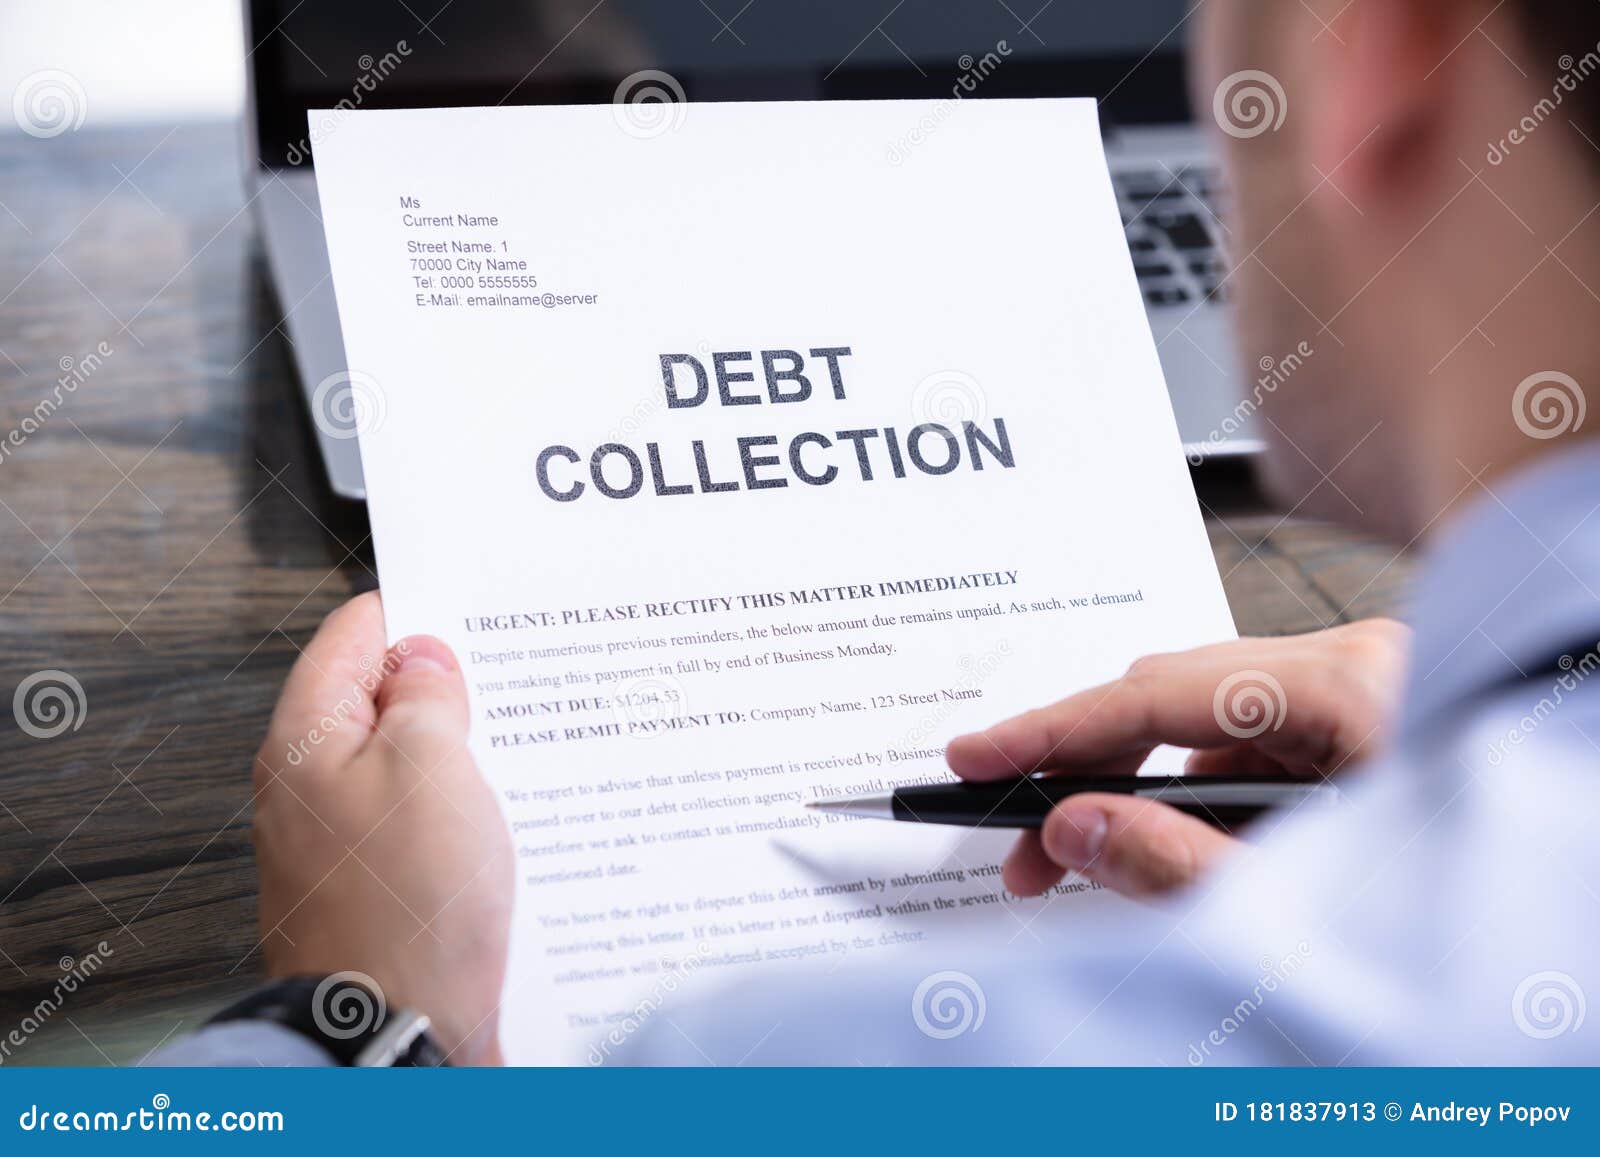 man reading debt collection letter